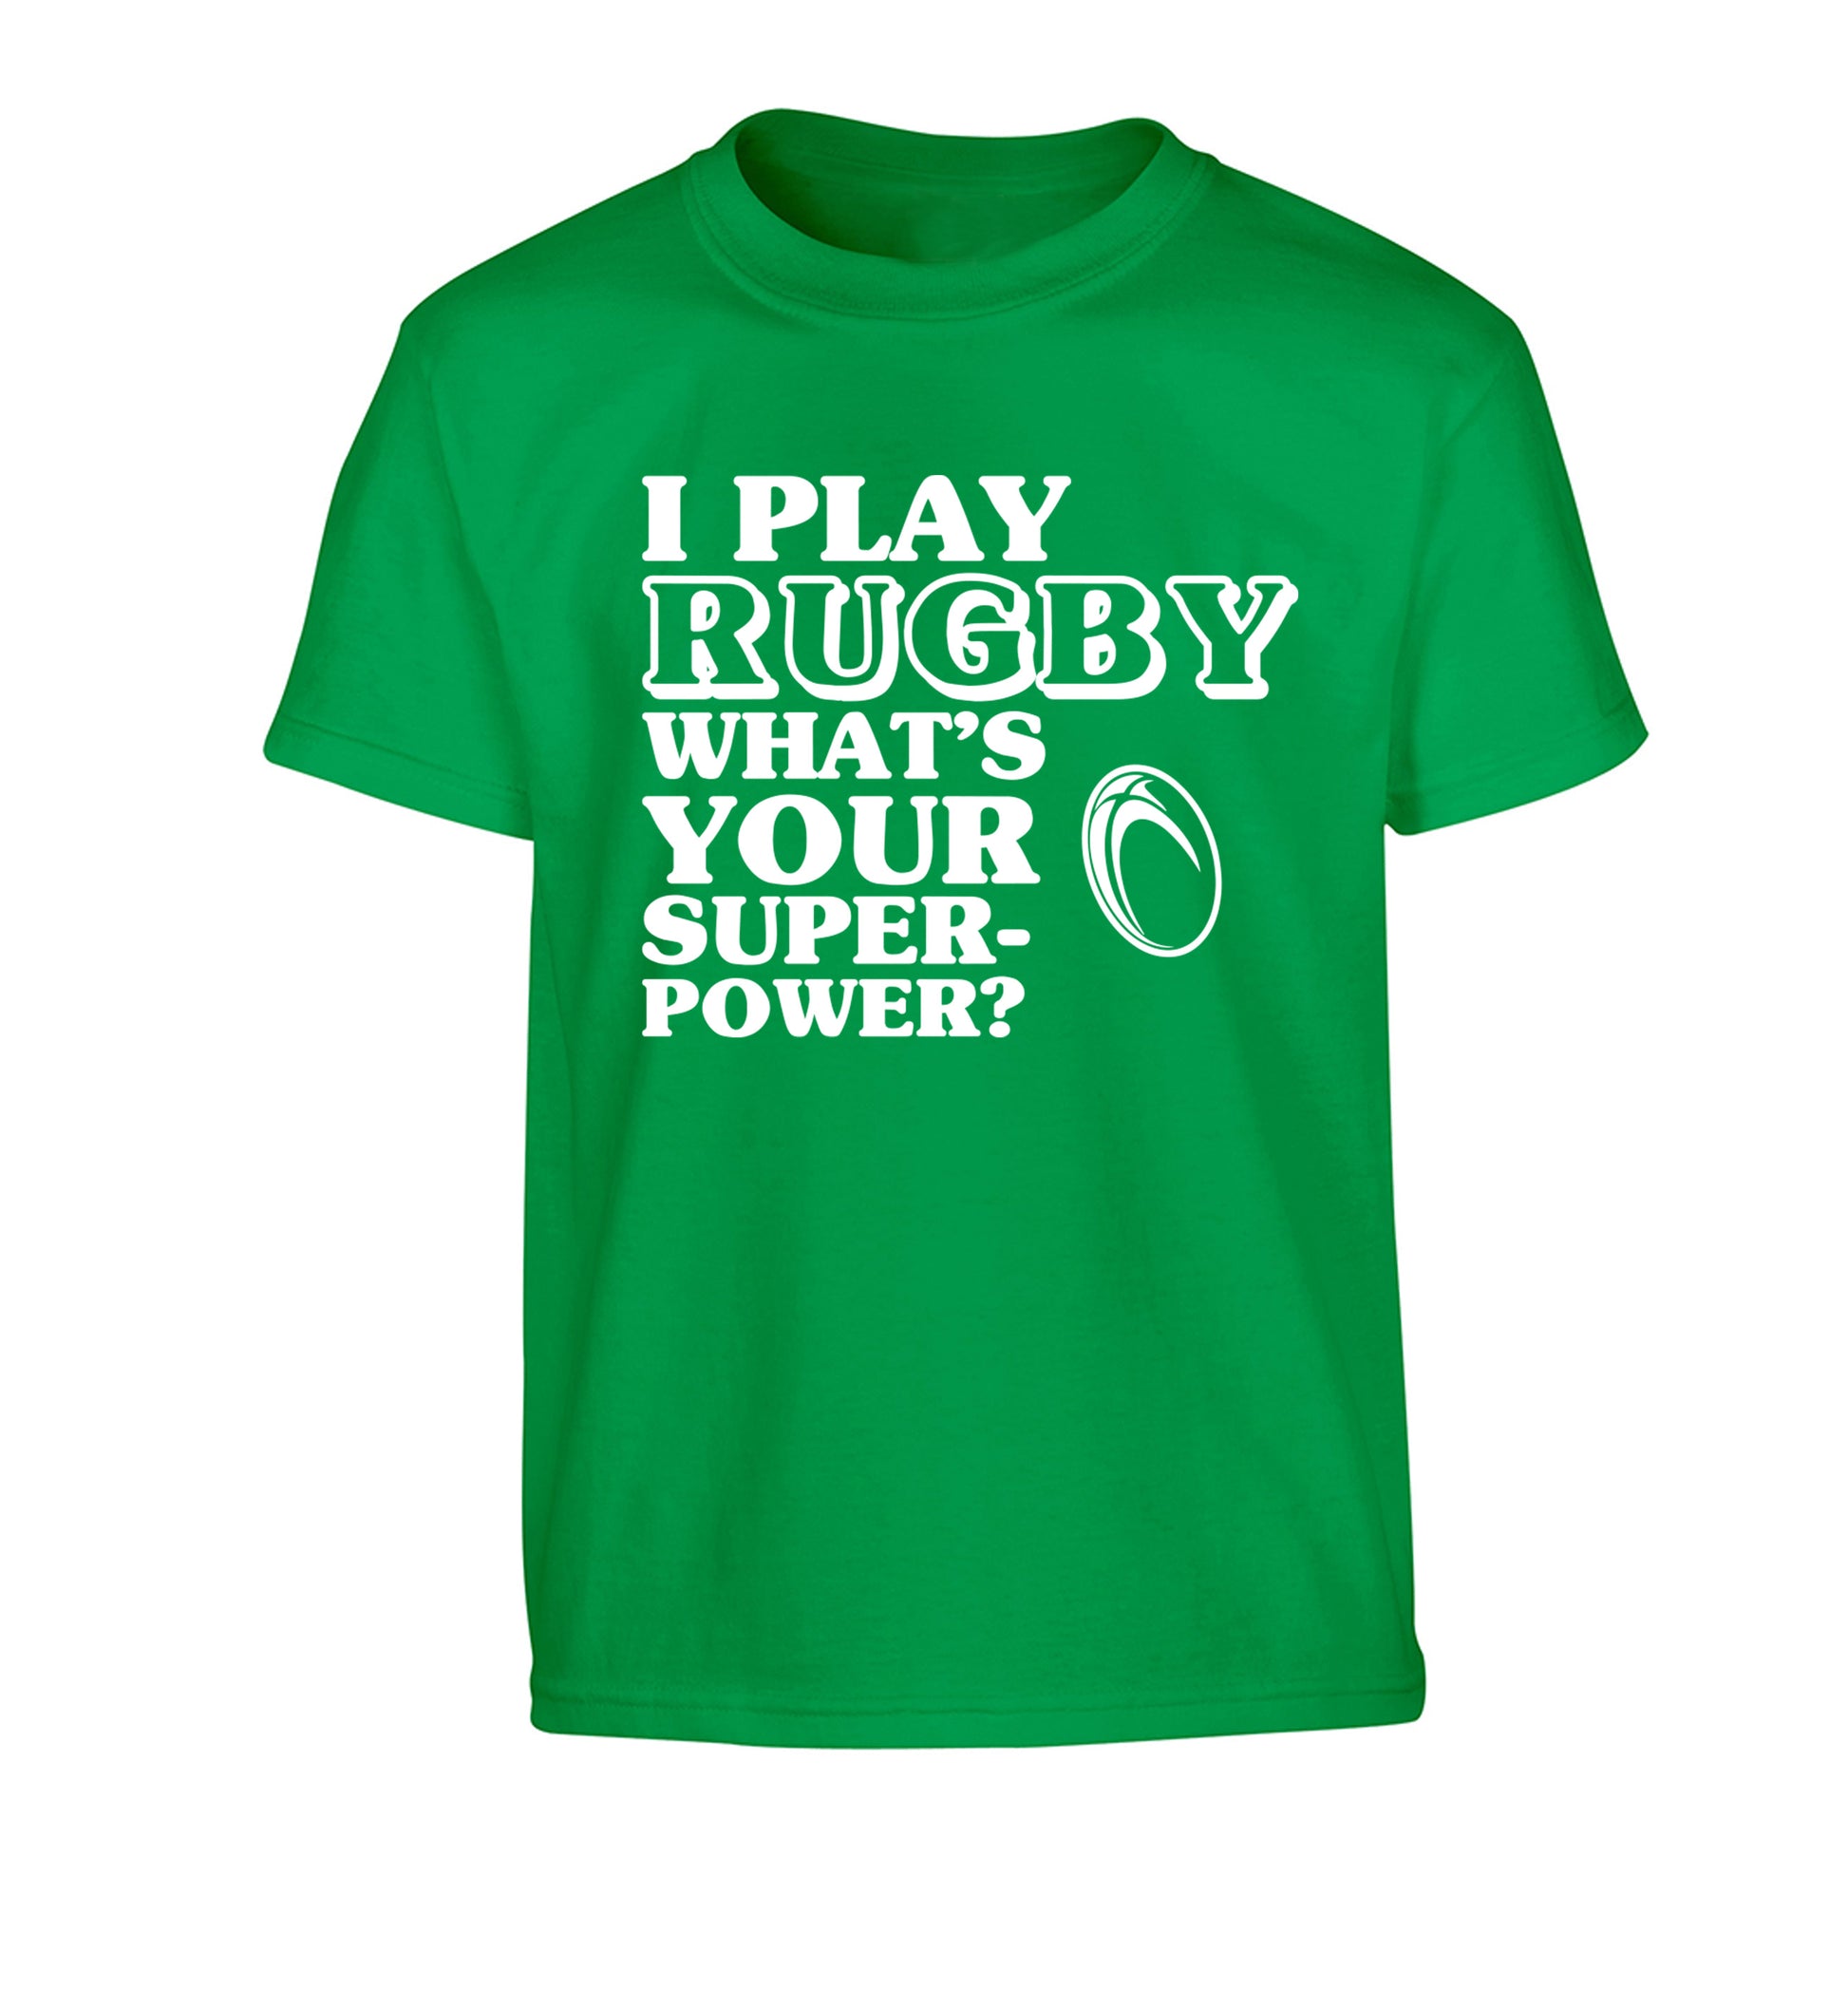 I play rugby what's your superpower? Children's green Tshirt 12-13 Years